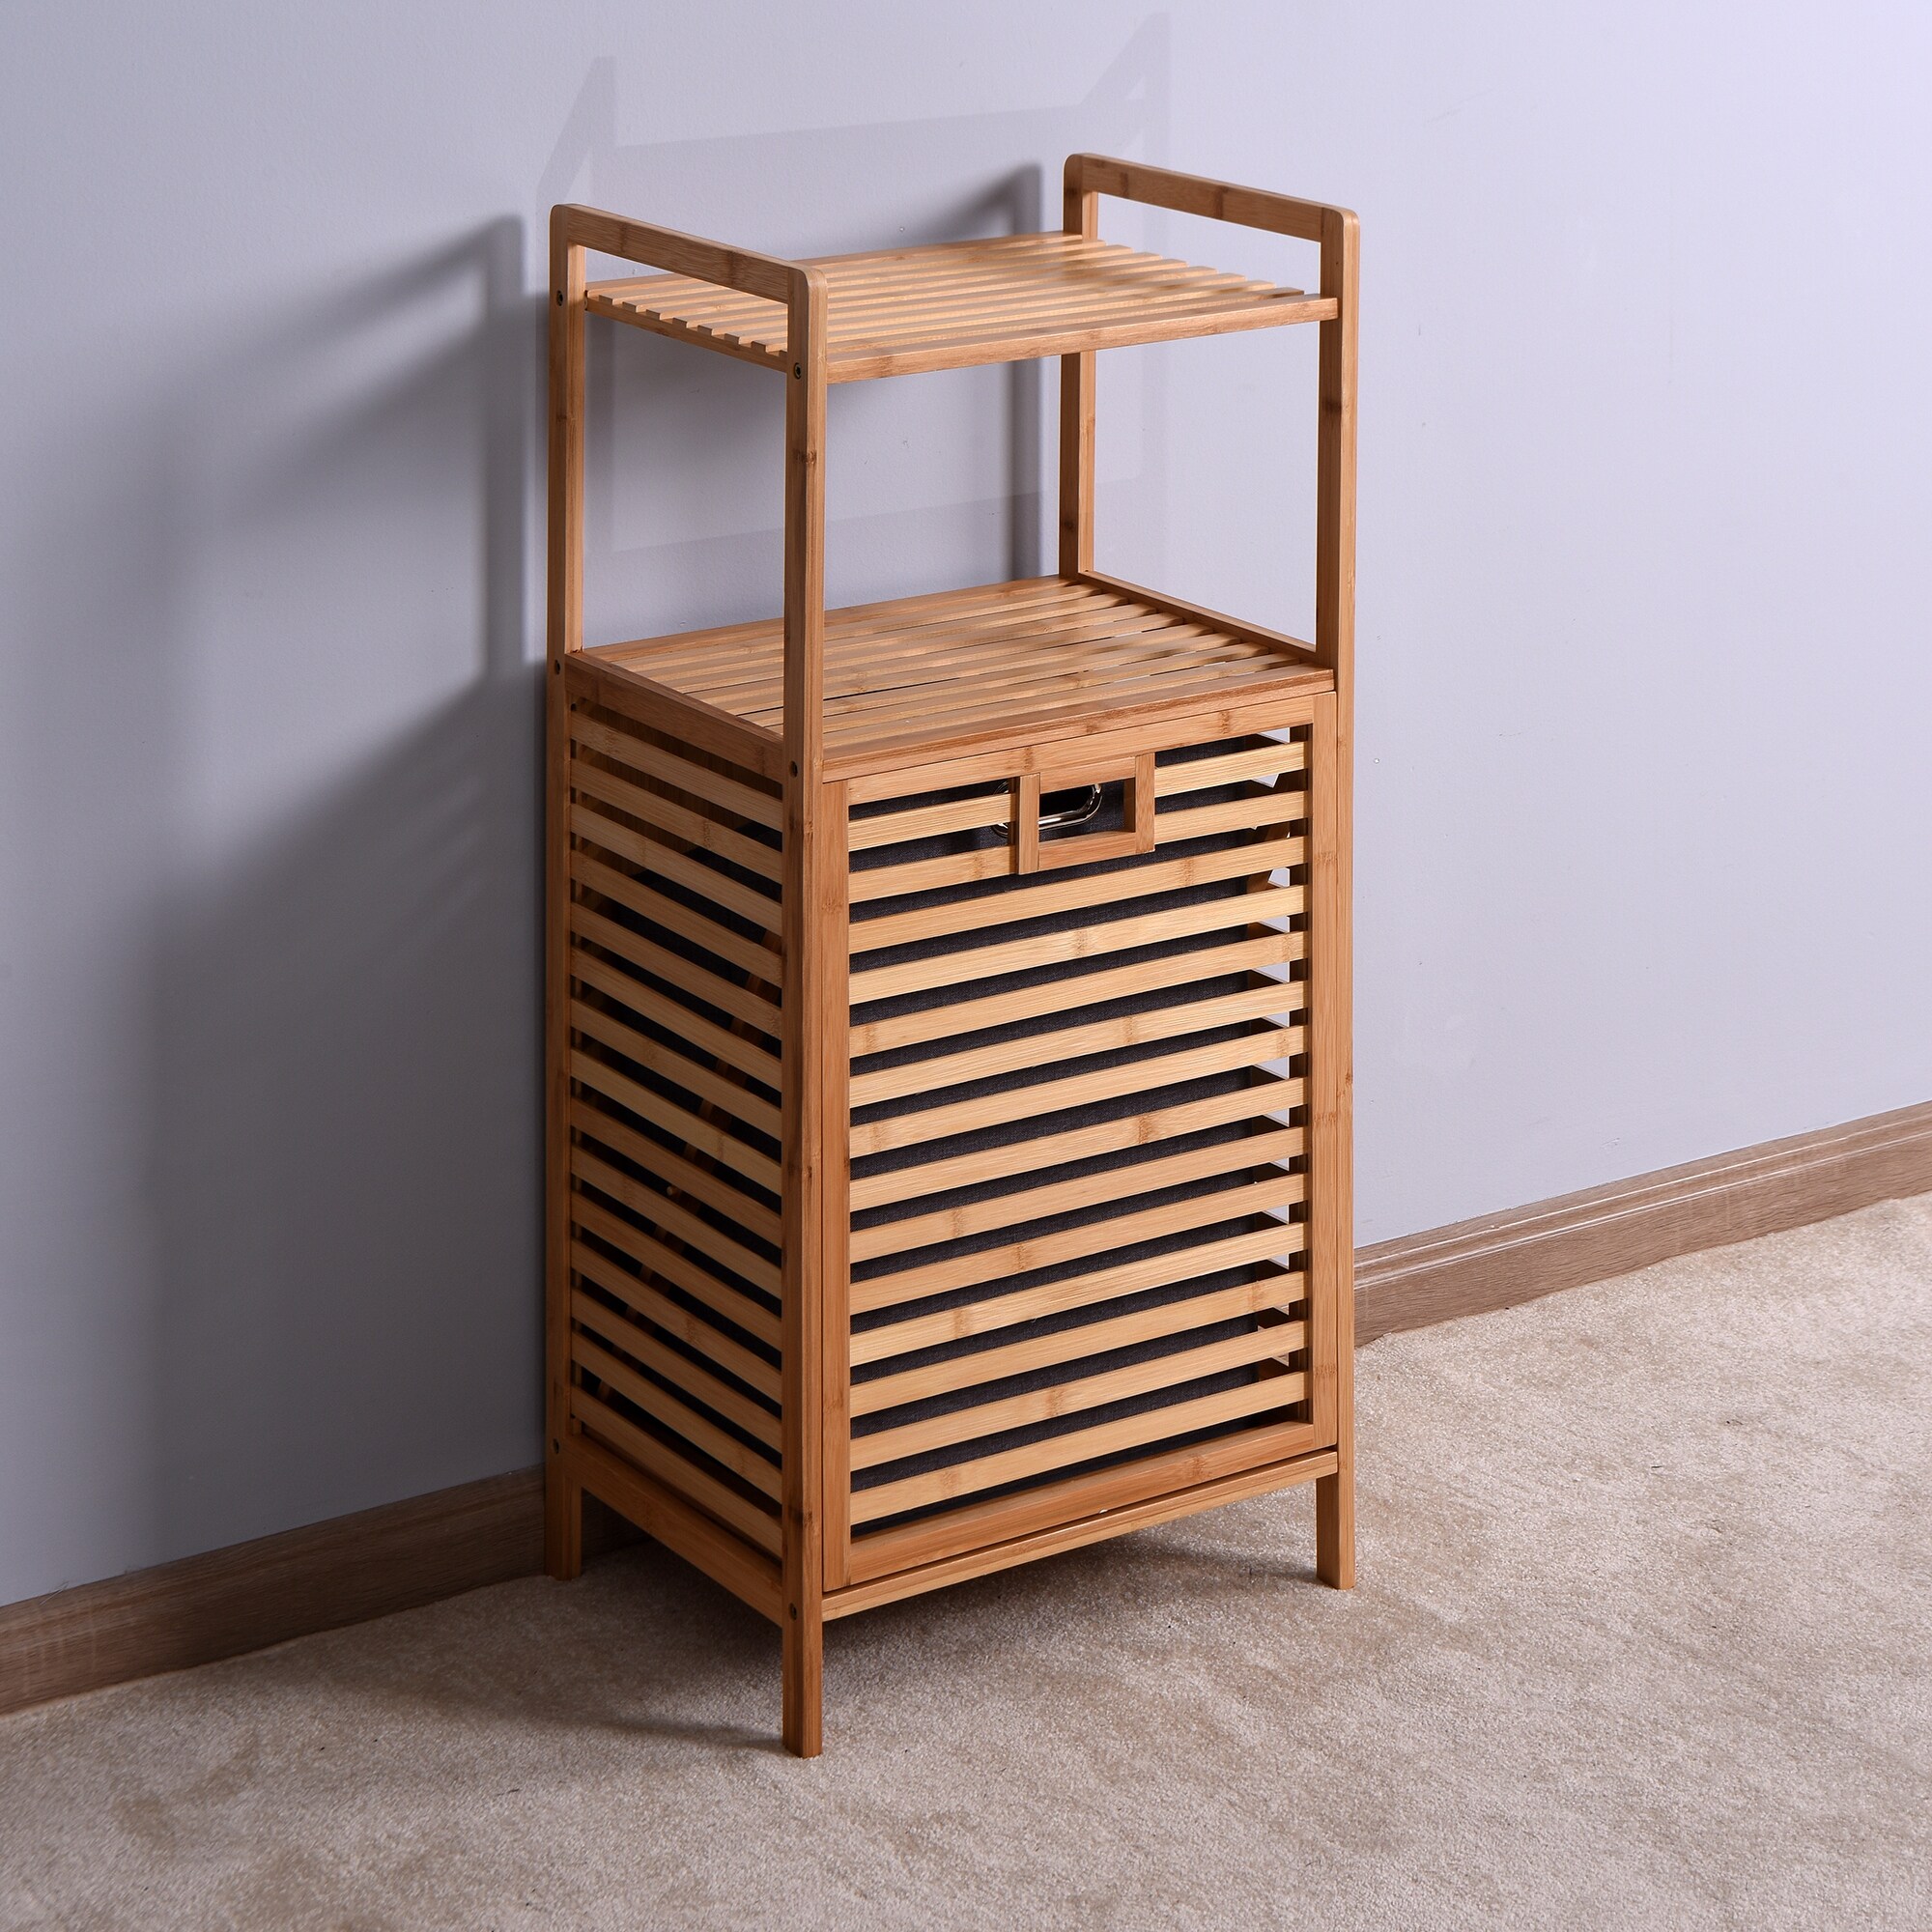 https://ak1.ostkcdn.com/images/products/is/images/direct/483262a458ba135067c484b4bb5bc821a94bee2c/Bamboo-Tilt-Out-Laundry-Hamper-Cabinet%2C-Bathroom-Storage-Cabinet-with-Basket%2C-Shelves-and-Handles-for-Clothes%2C-Bedroom.jpg